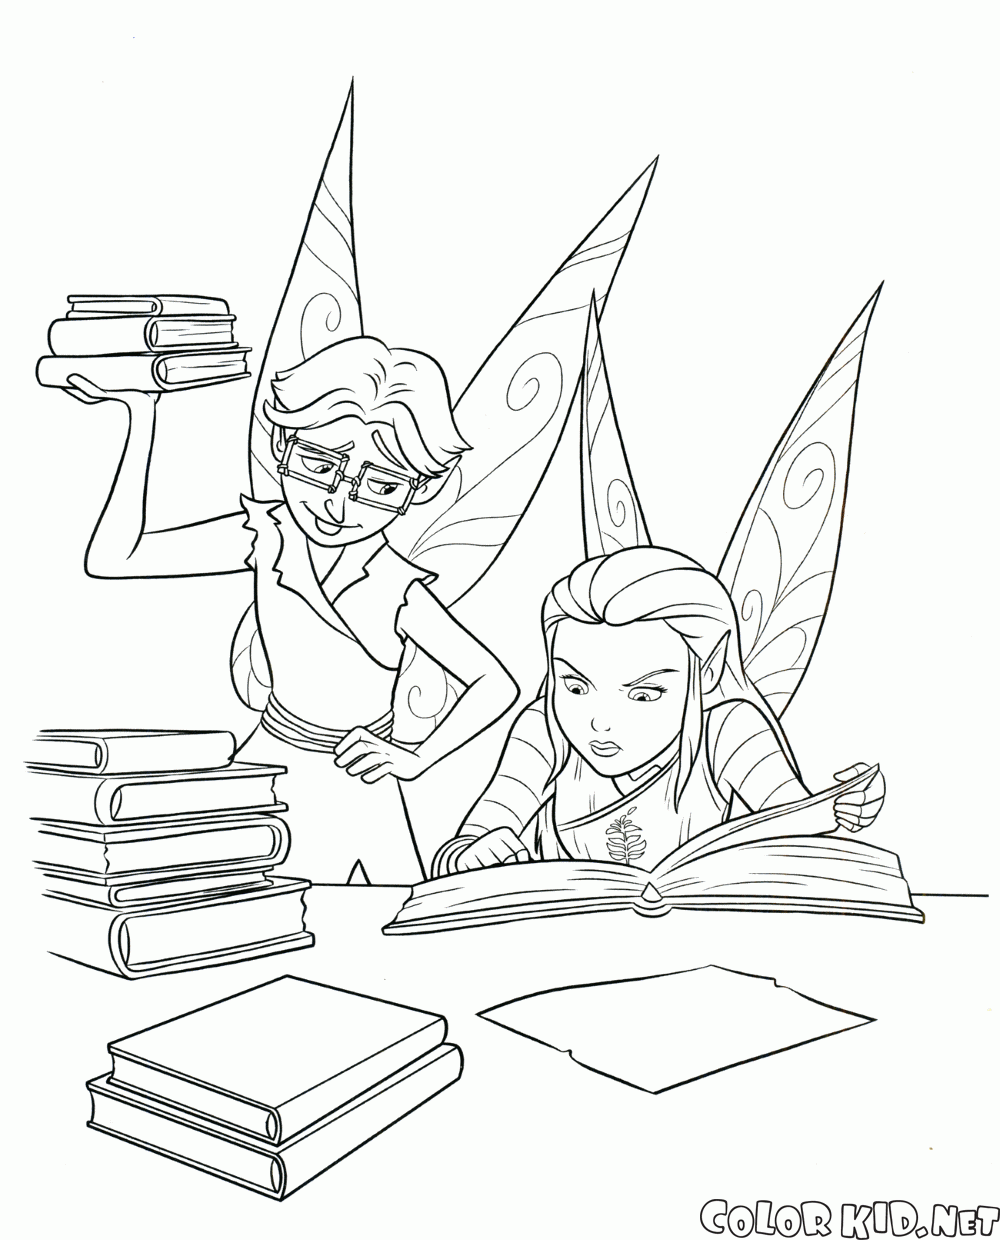 Nyx and the library